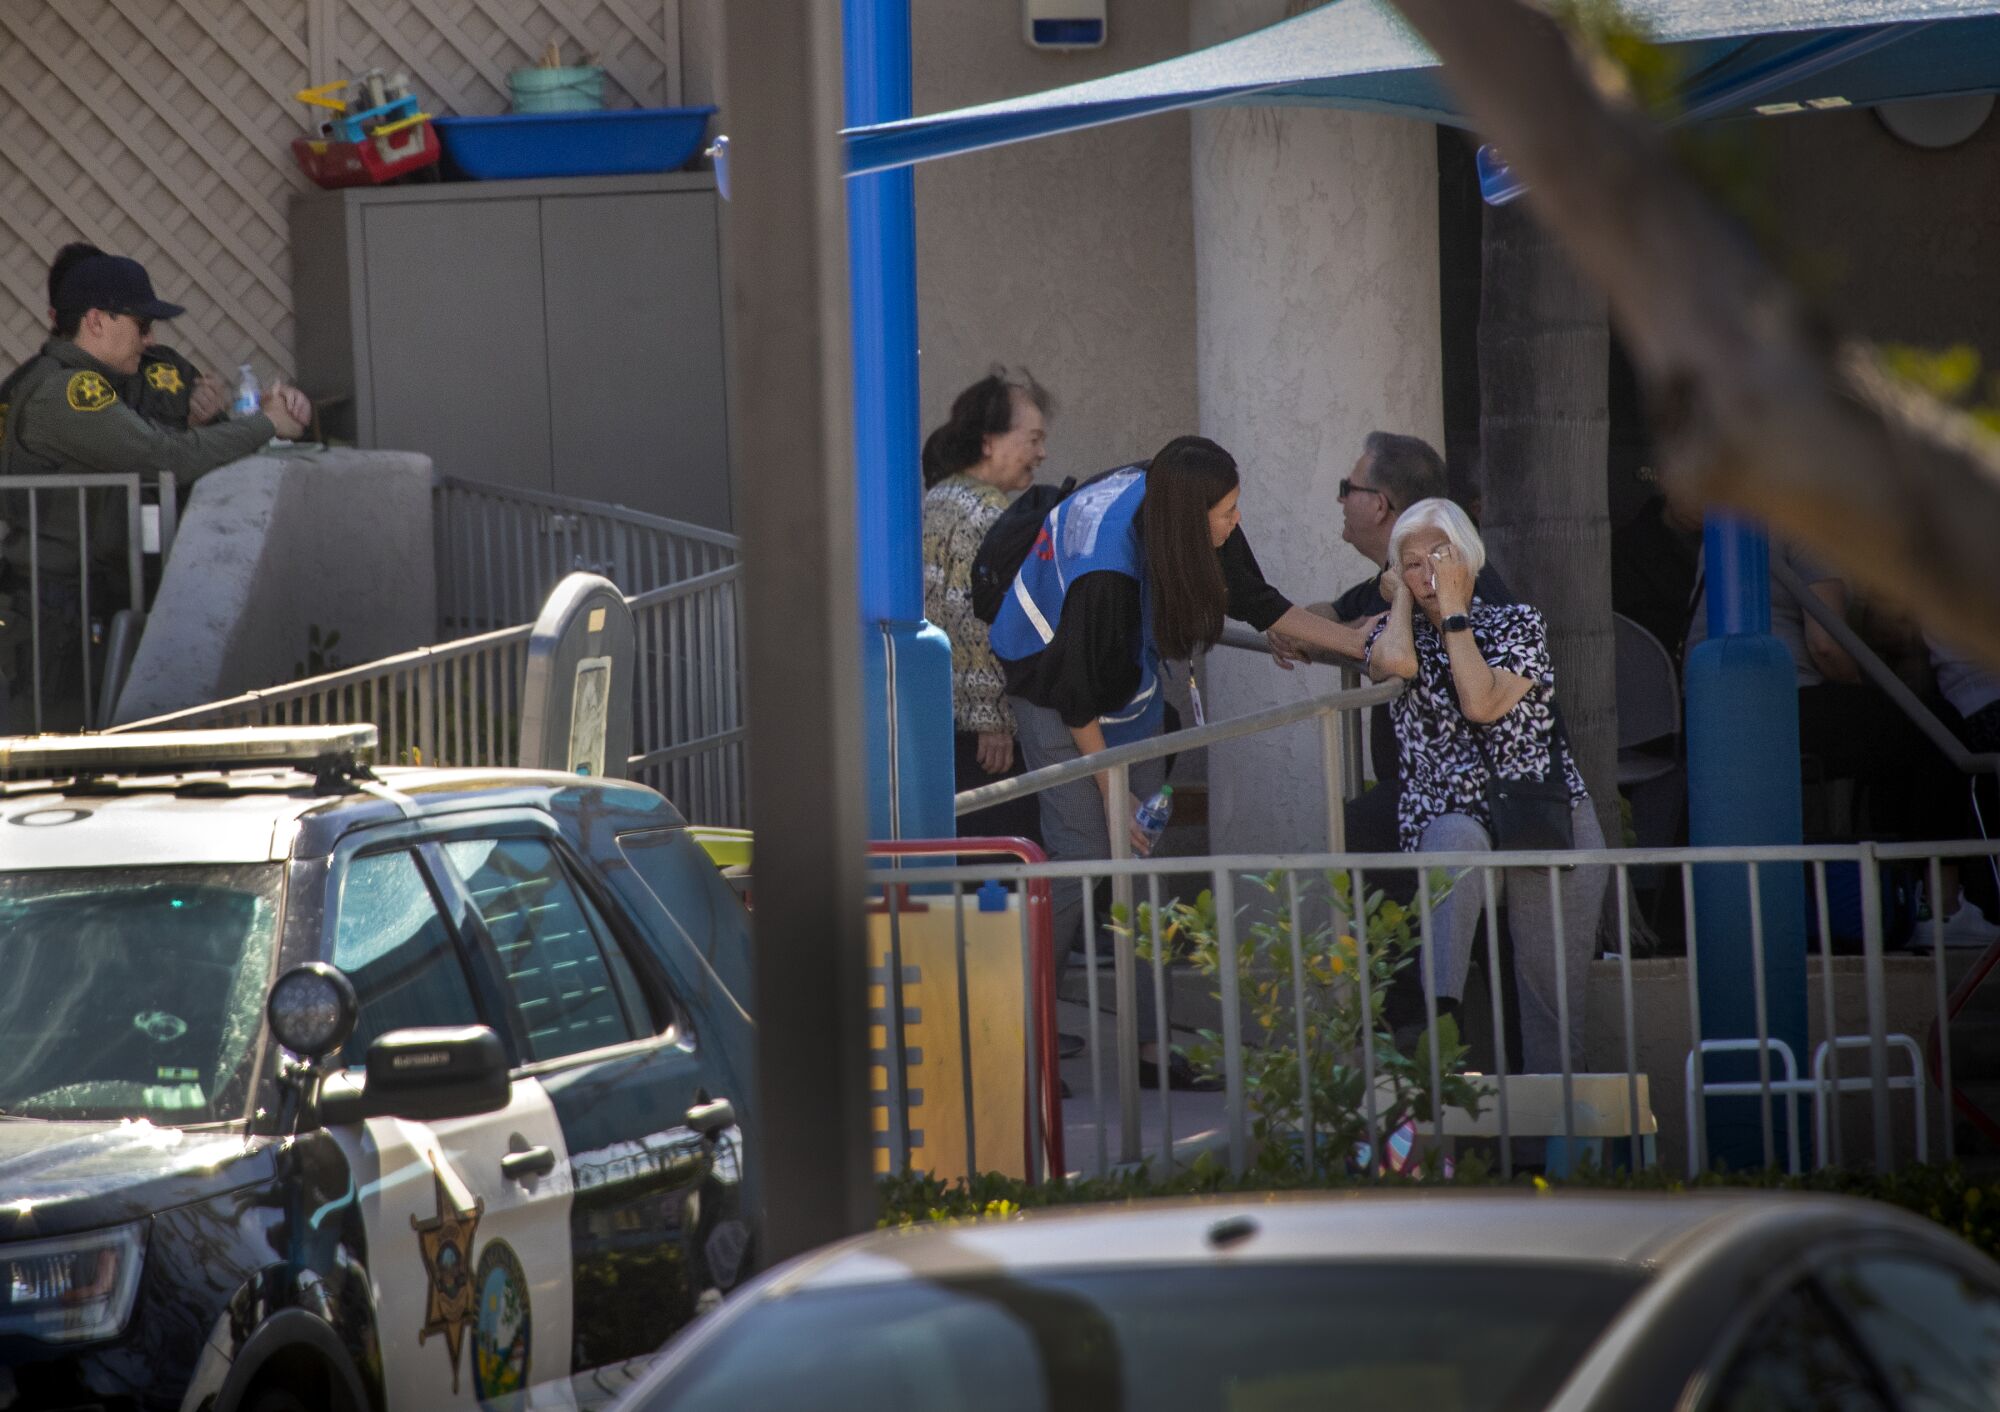 A grief counselor comforts a parishioner after a shooting Sunday at Geneva Presbyterian Church in Laguna Woods.